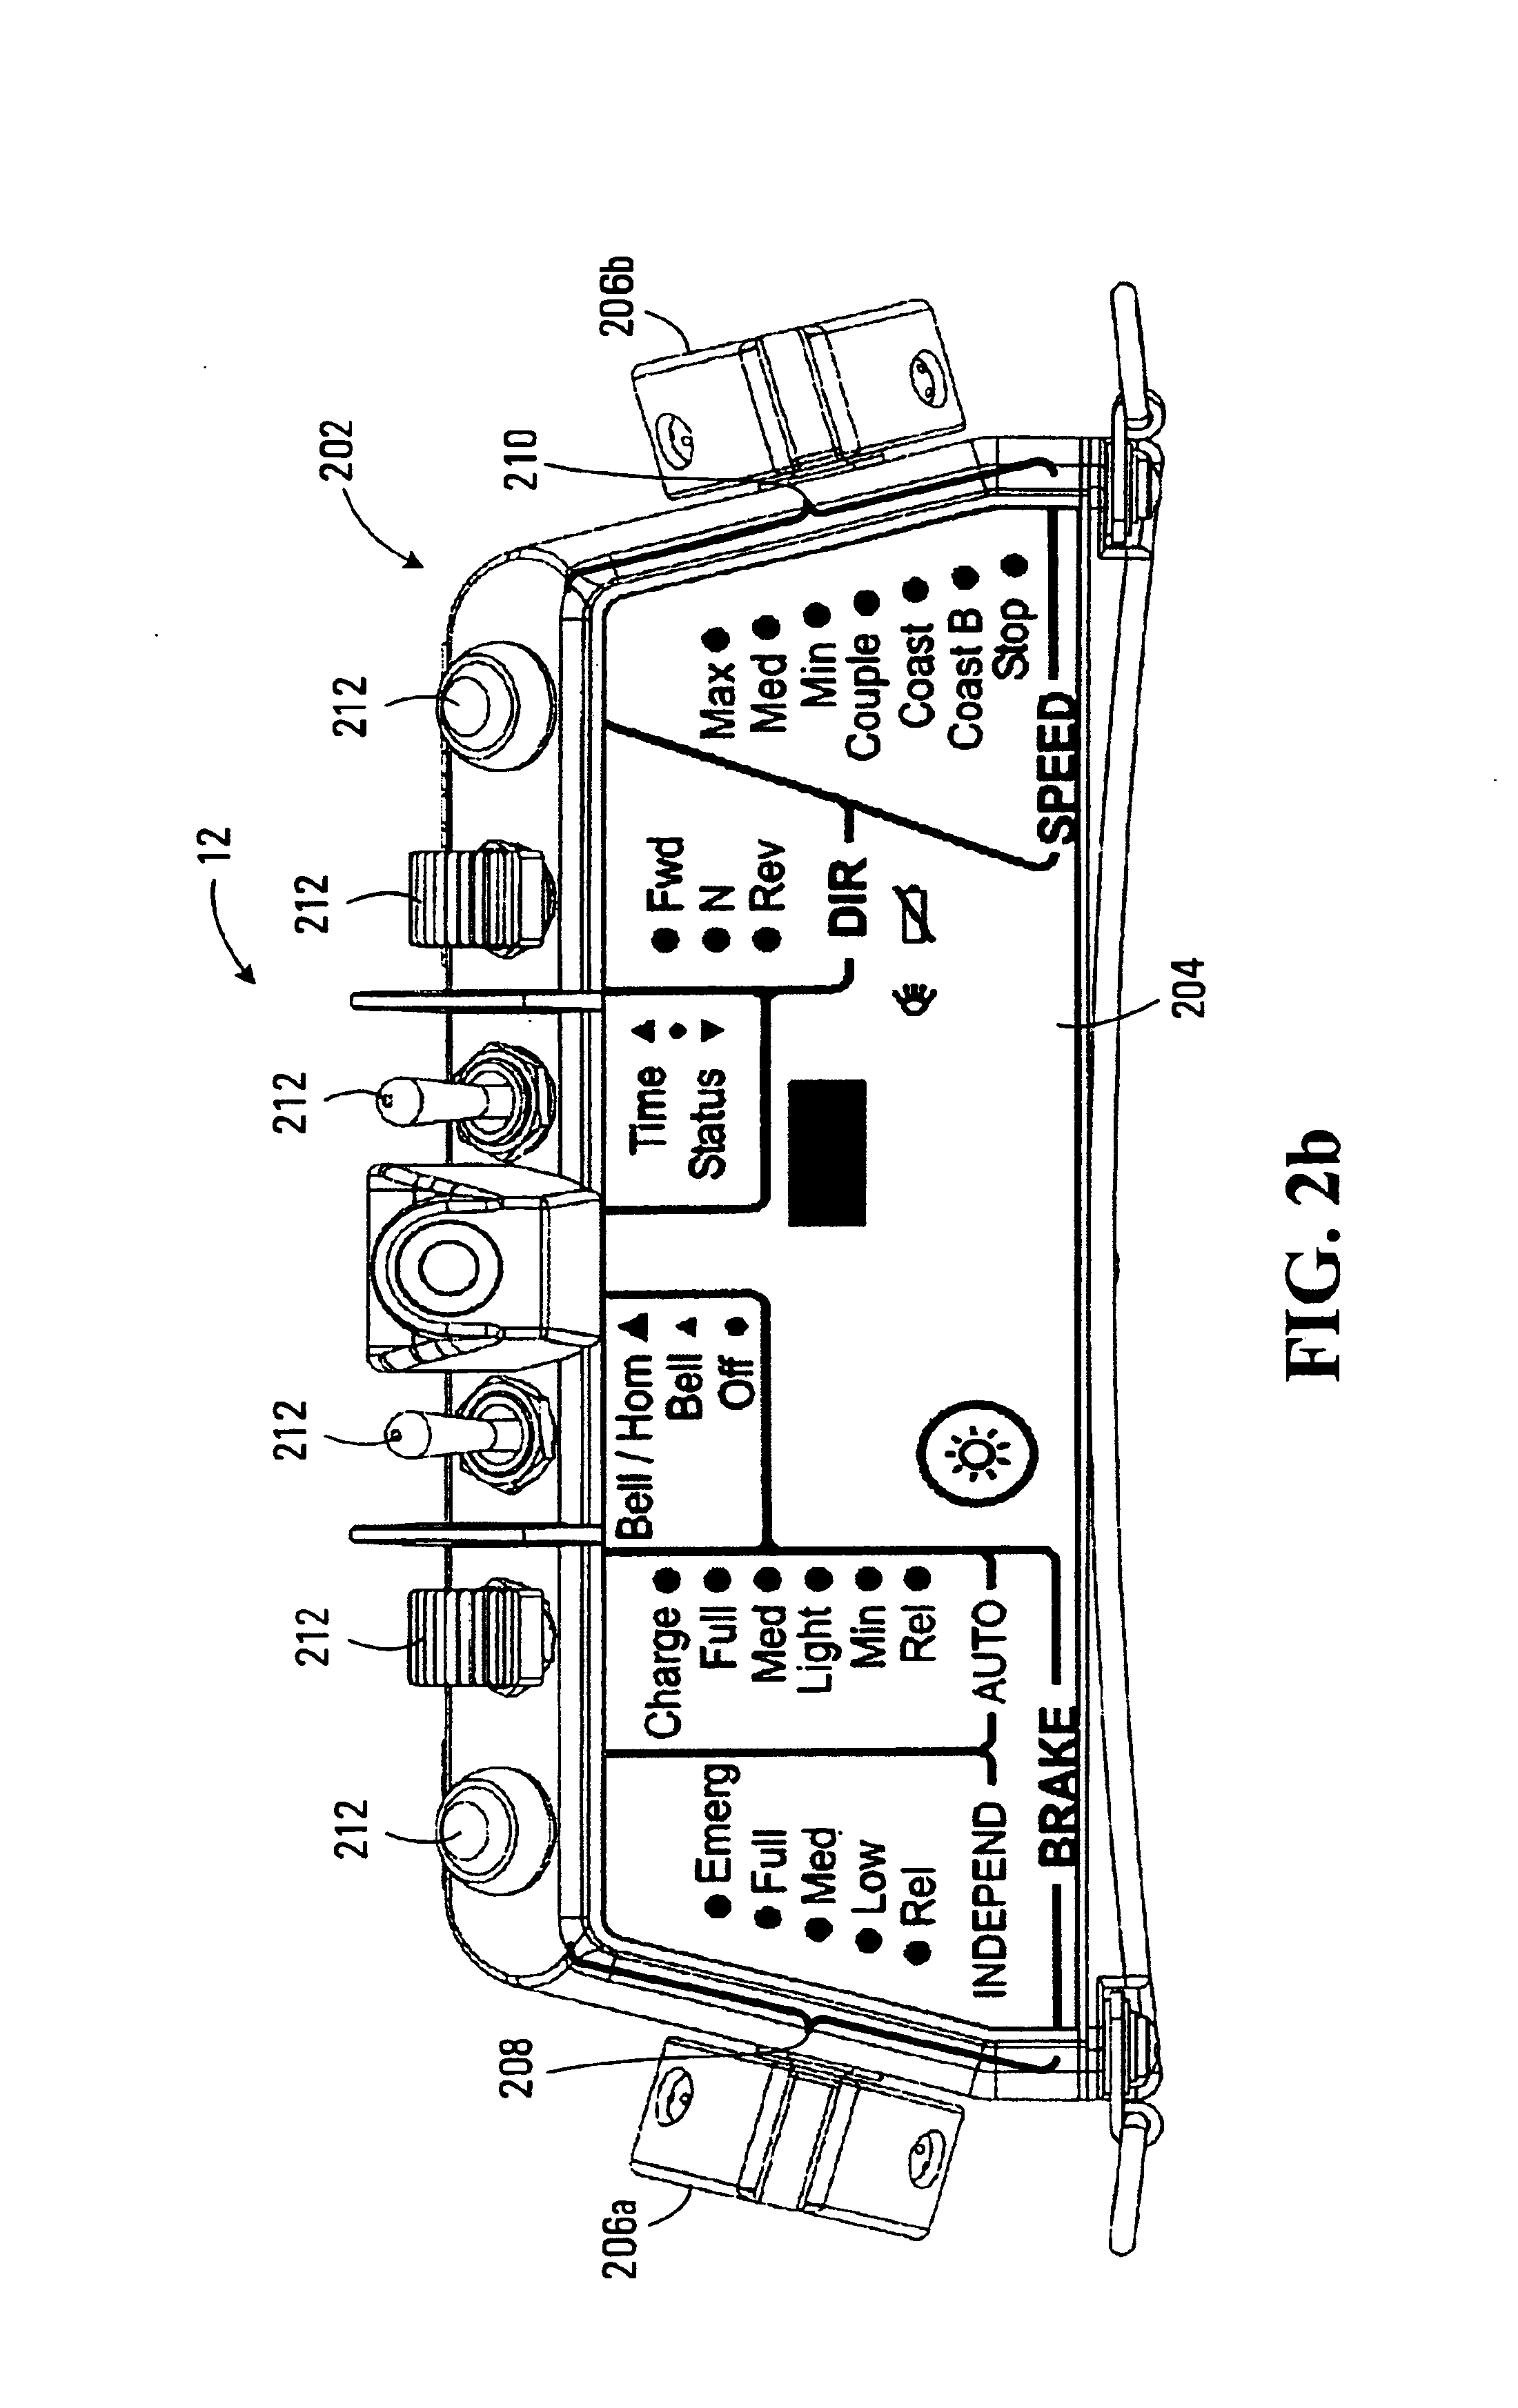 Programmable remote control system and apparatus for a locomotive